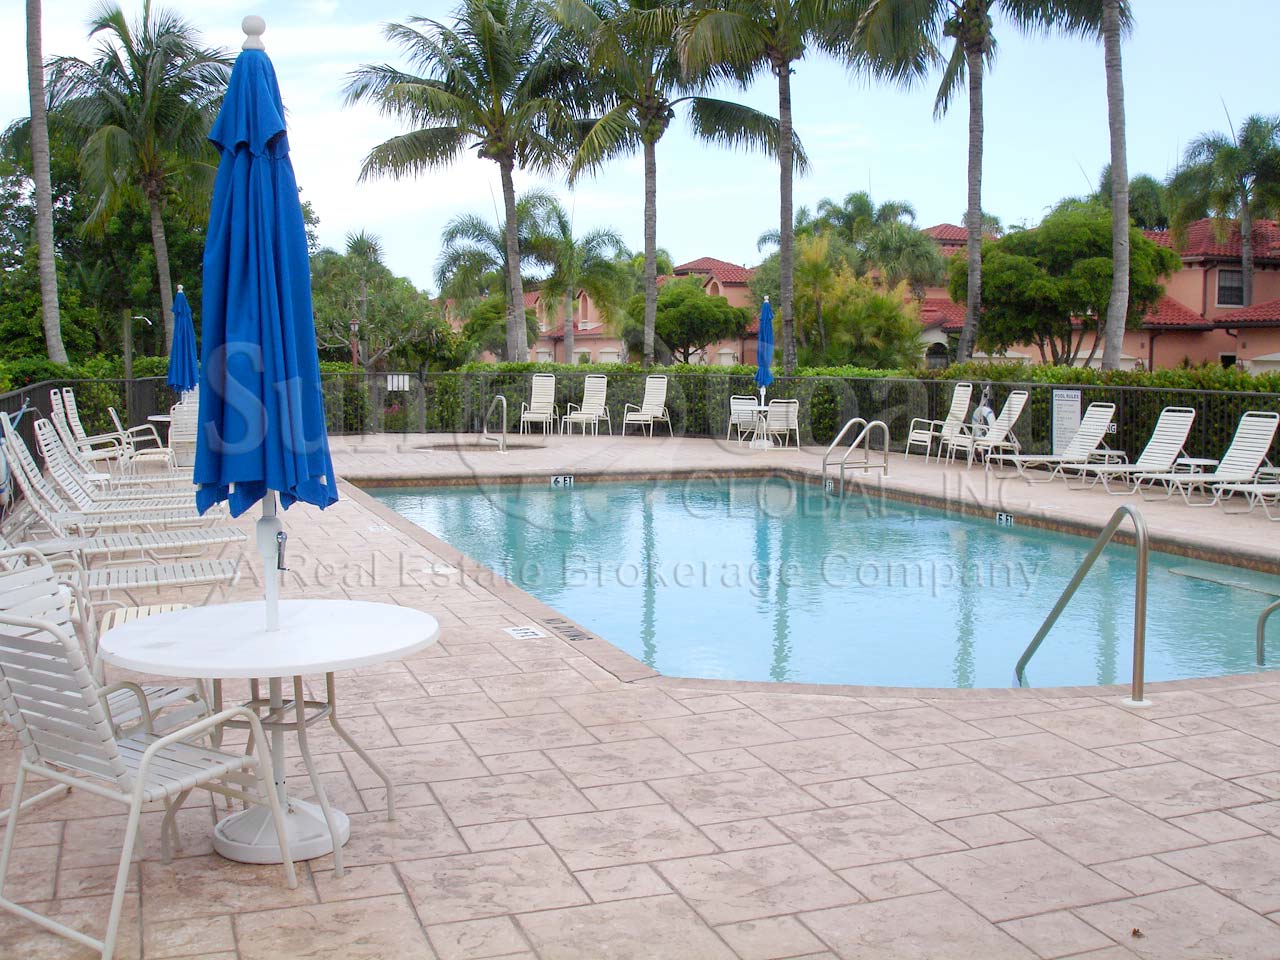 Grande Reserve community pool and spa